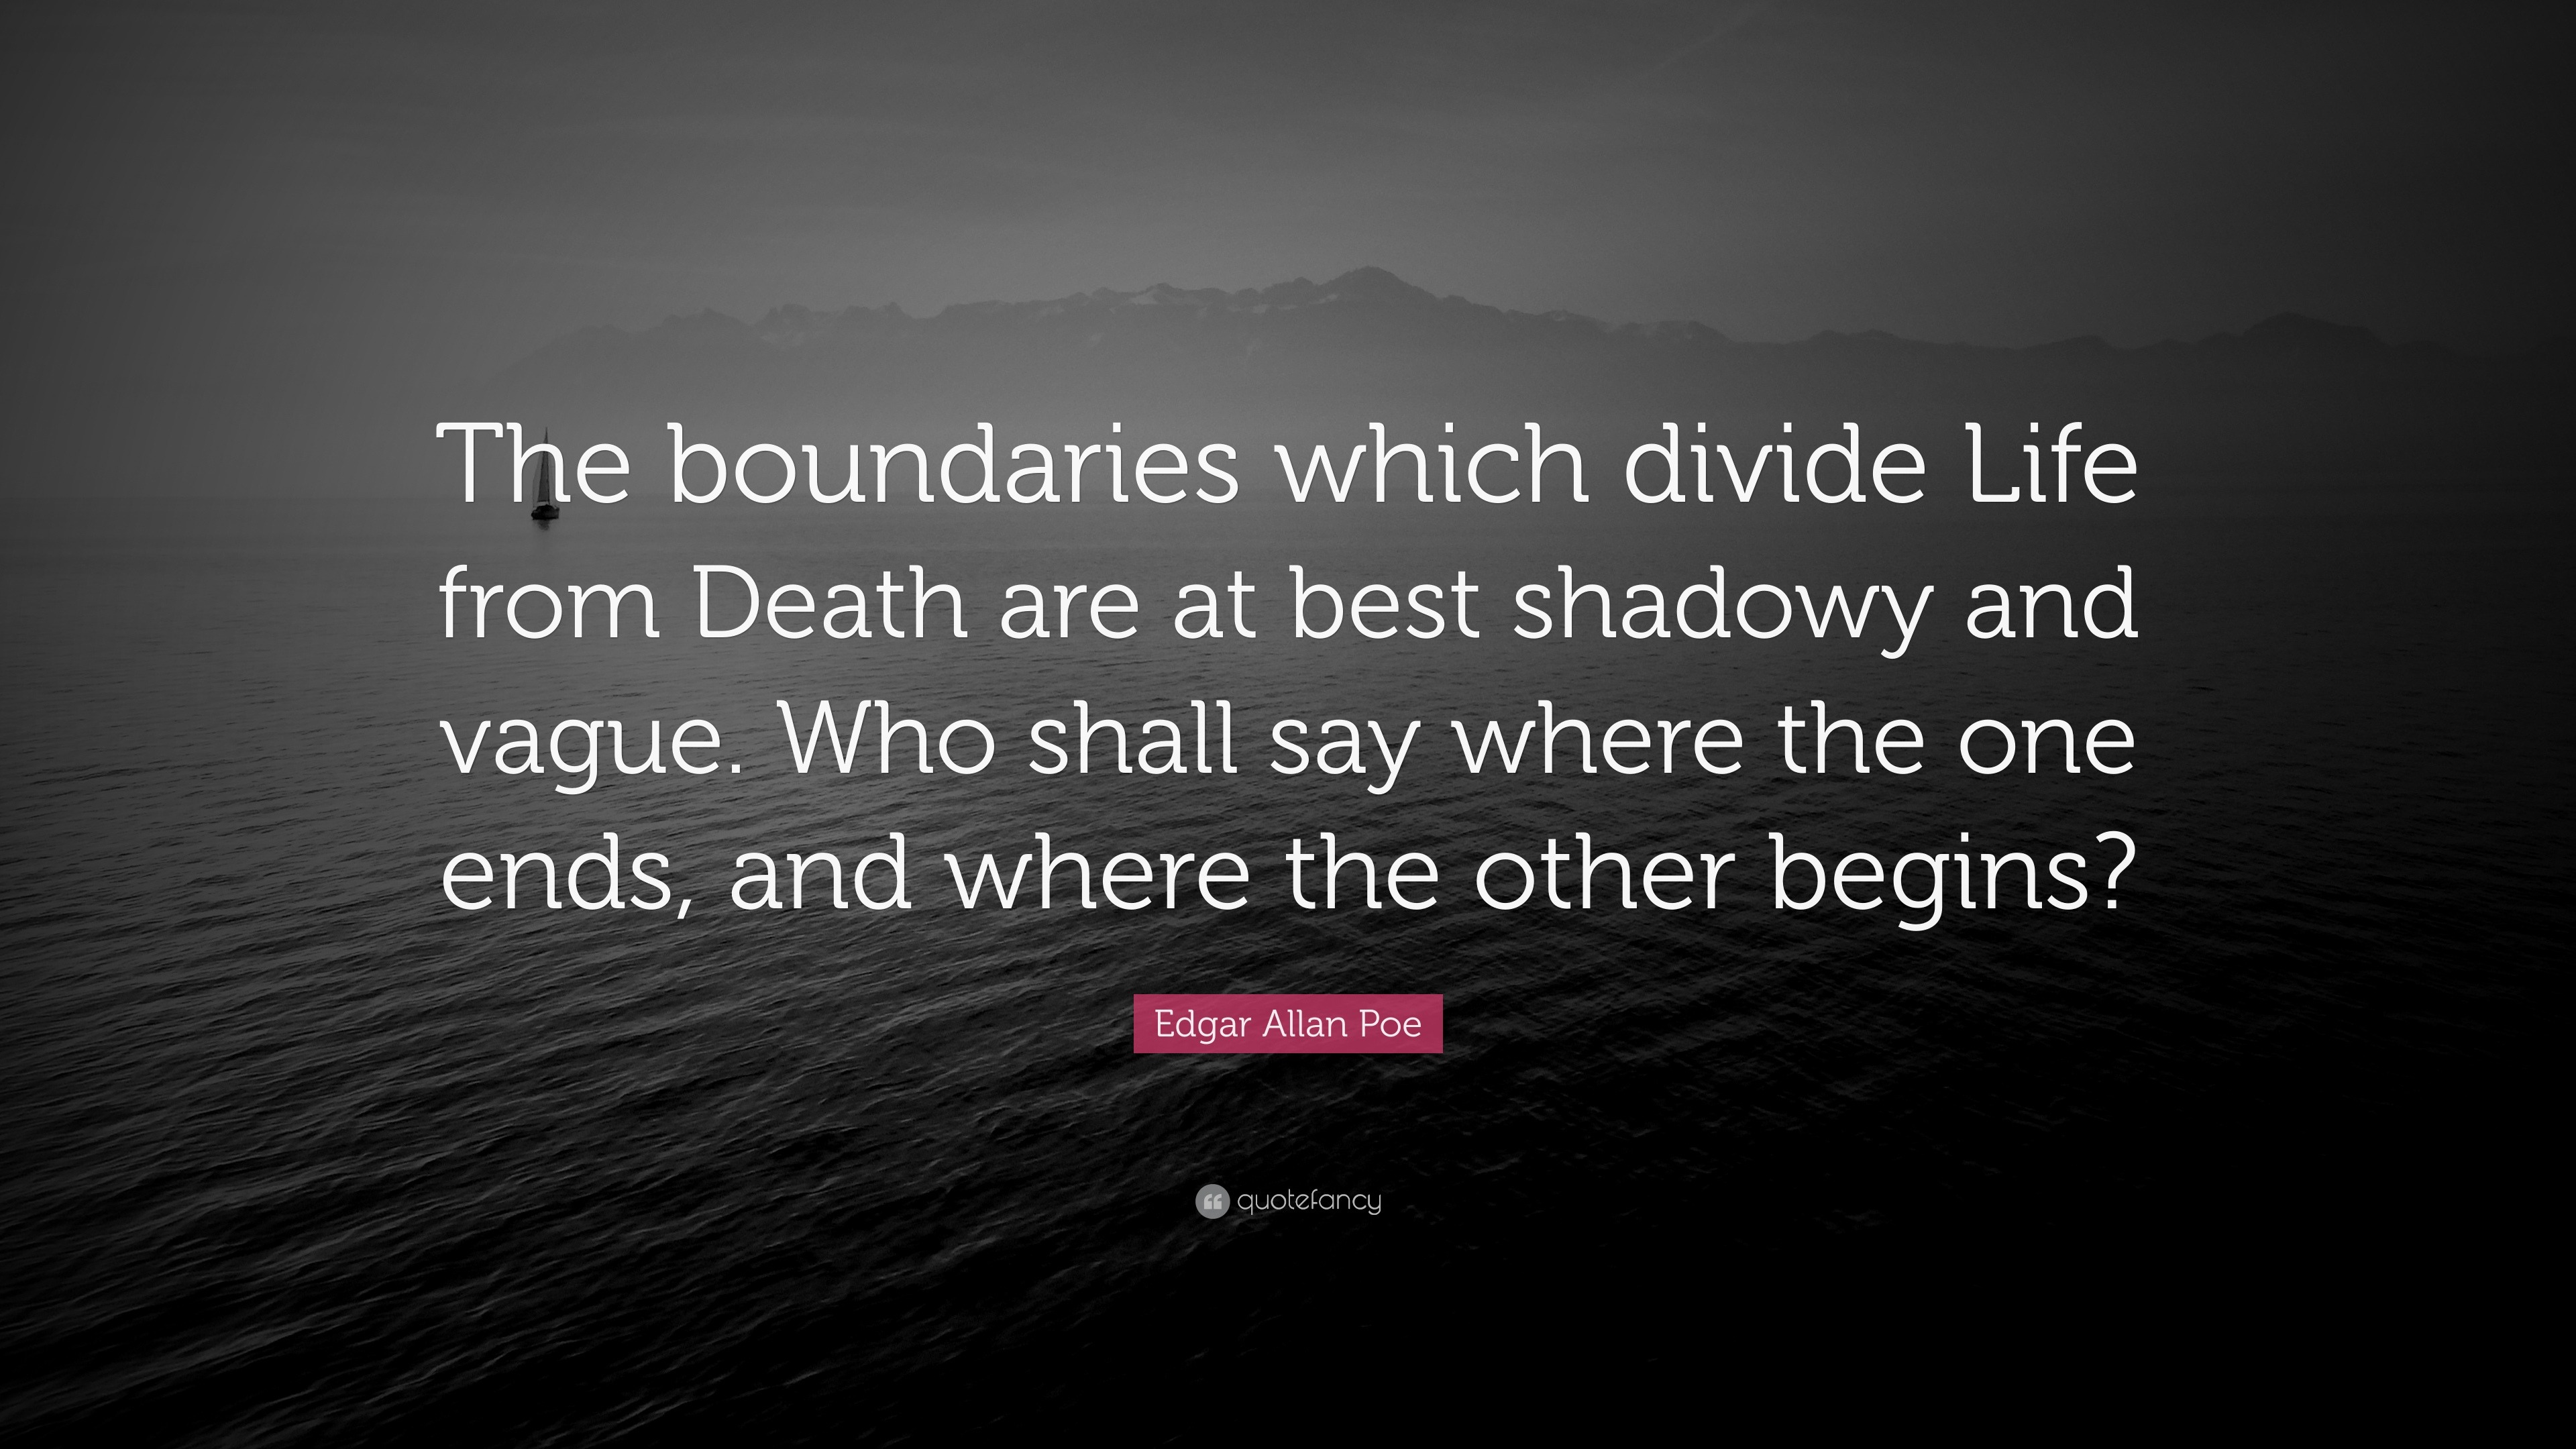 Edgar Allan Poe Quote “The boundaries which divide Life from Death are at best